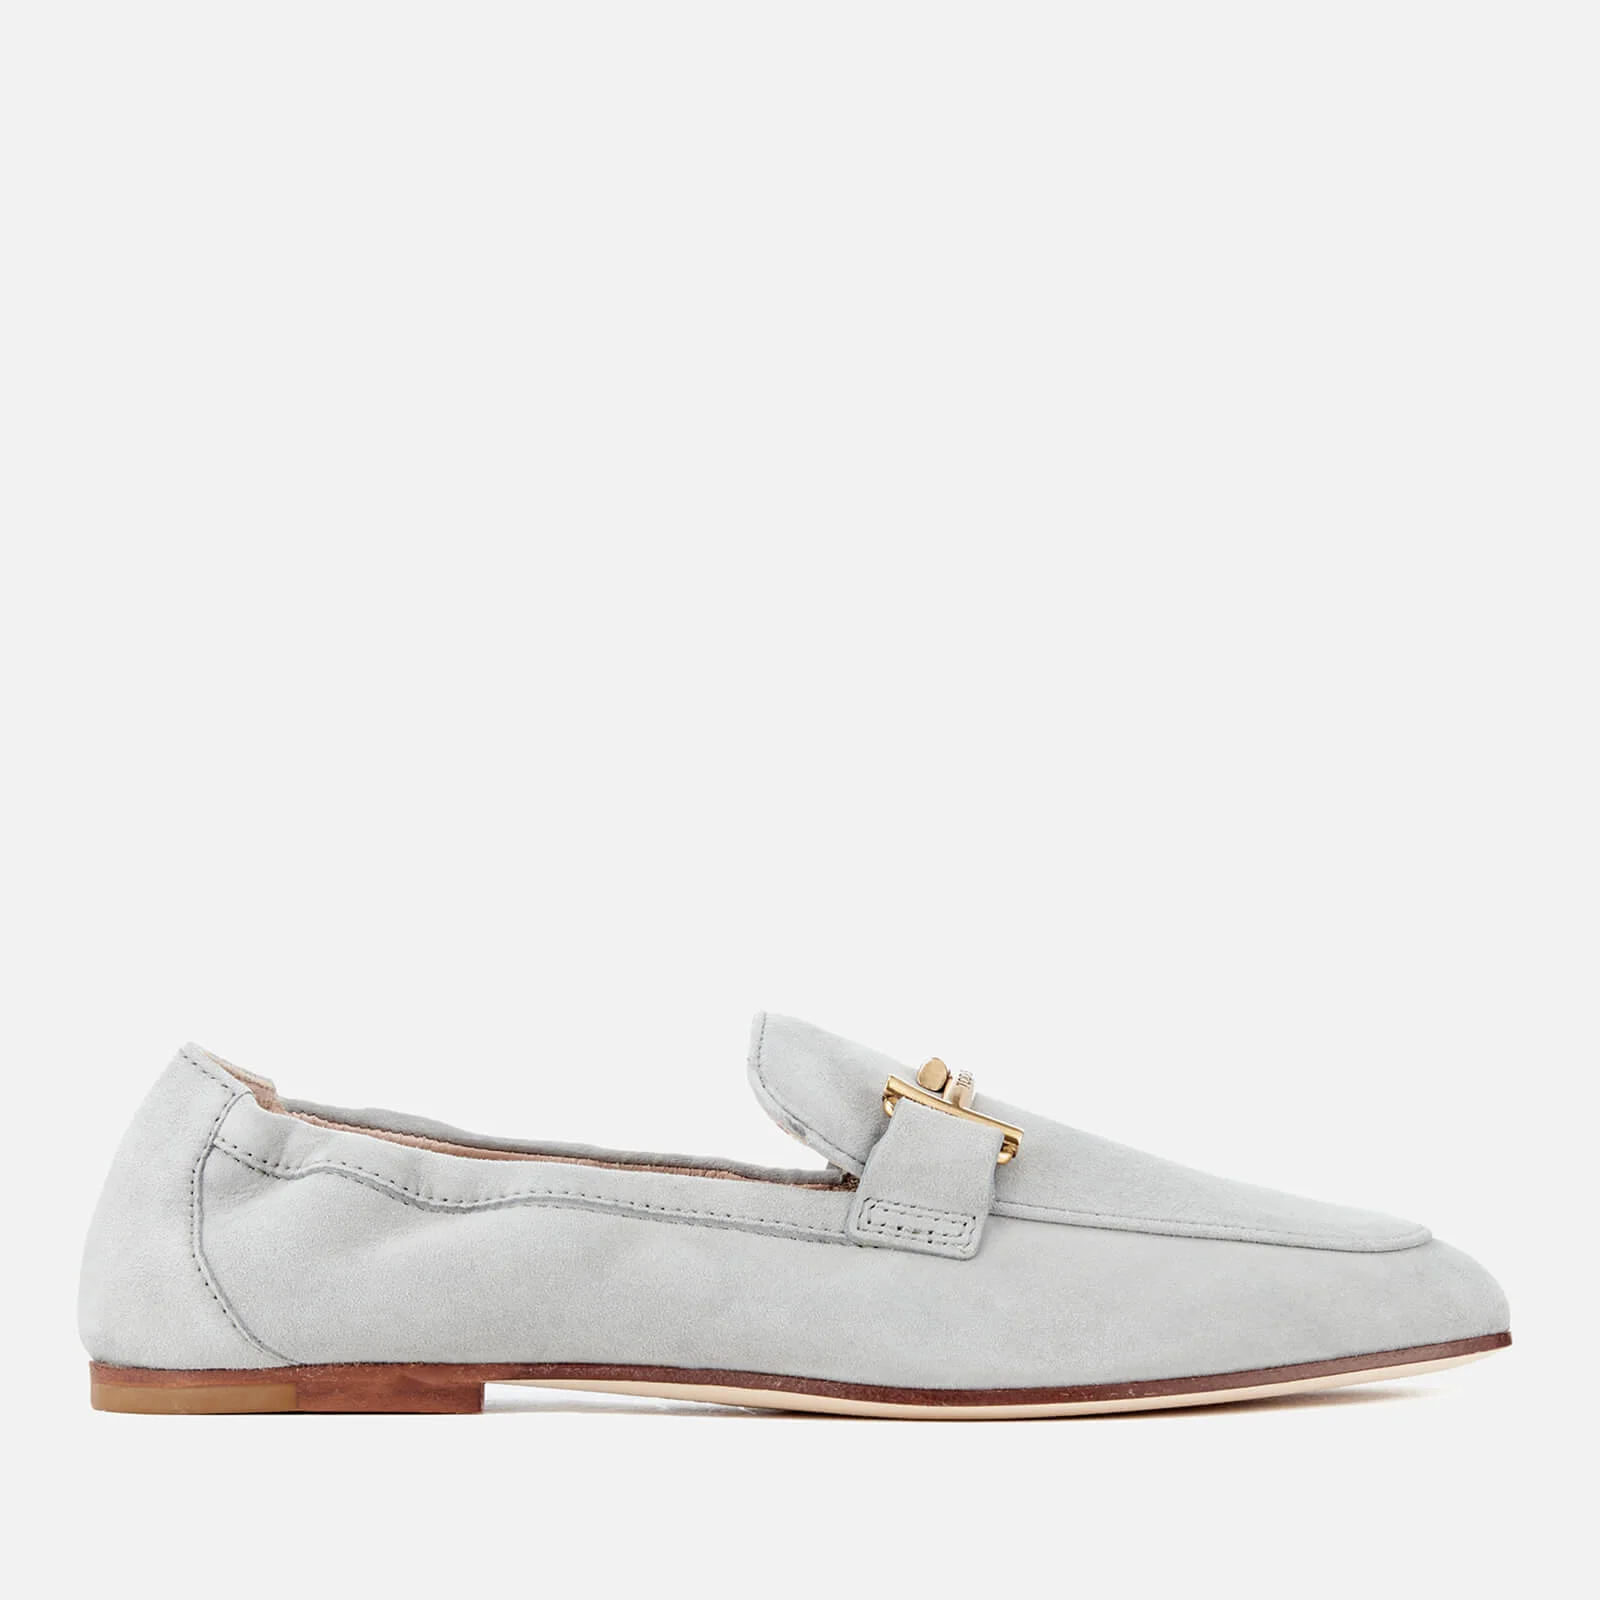 Tod's Women's Suede Double T Loafers - Grey Image 1